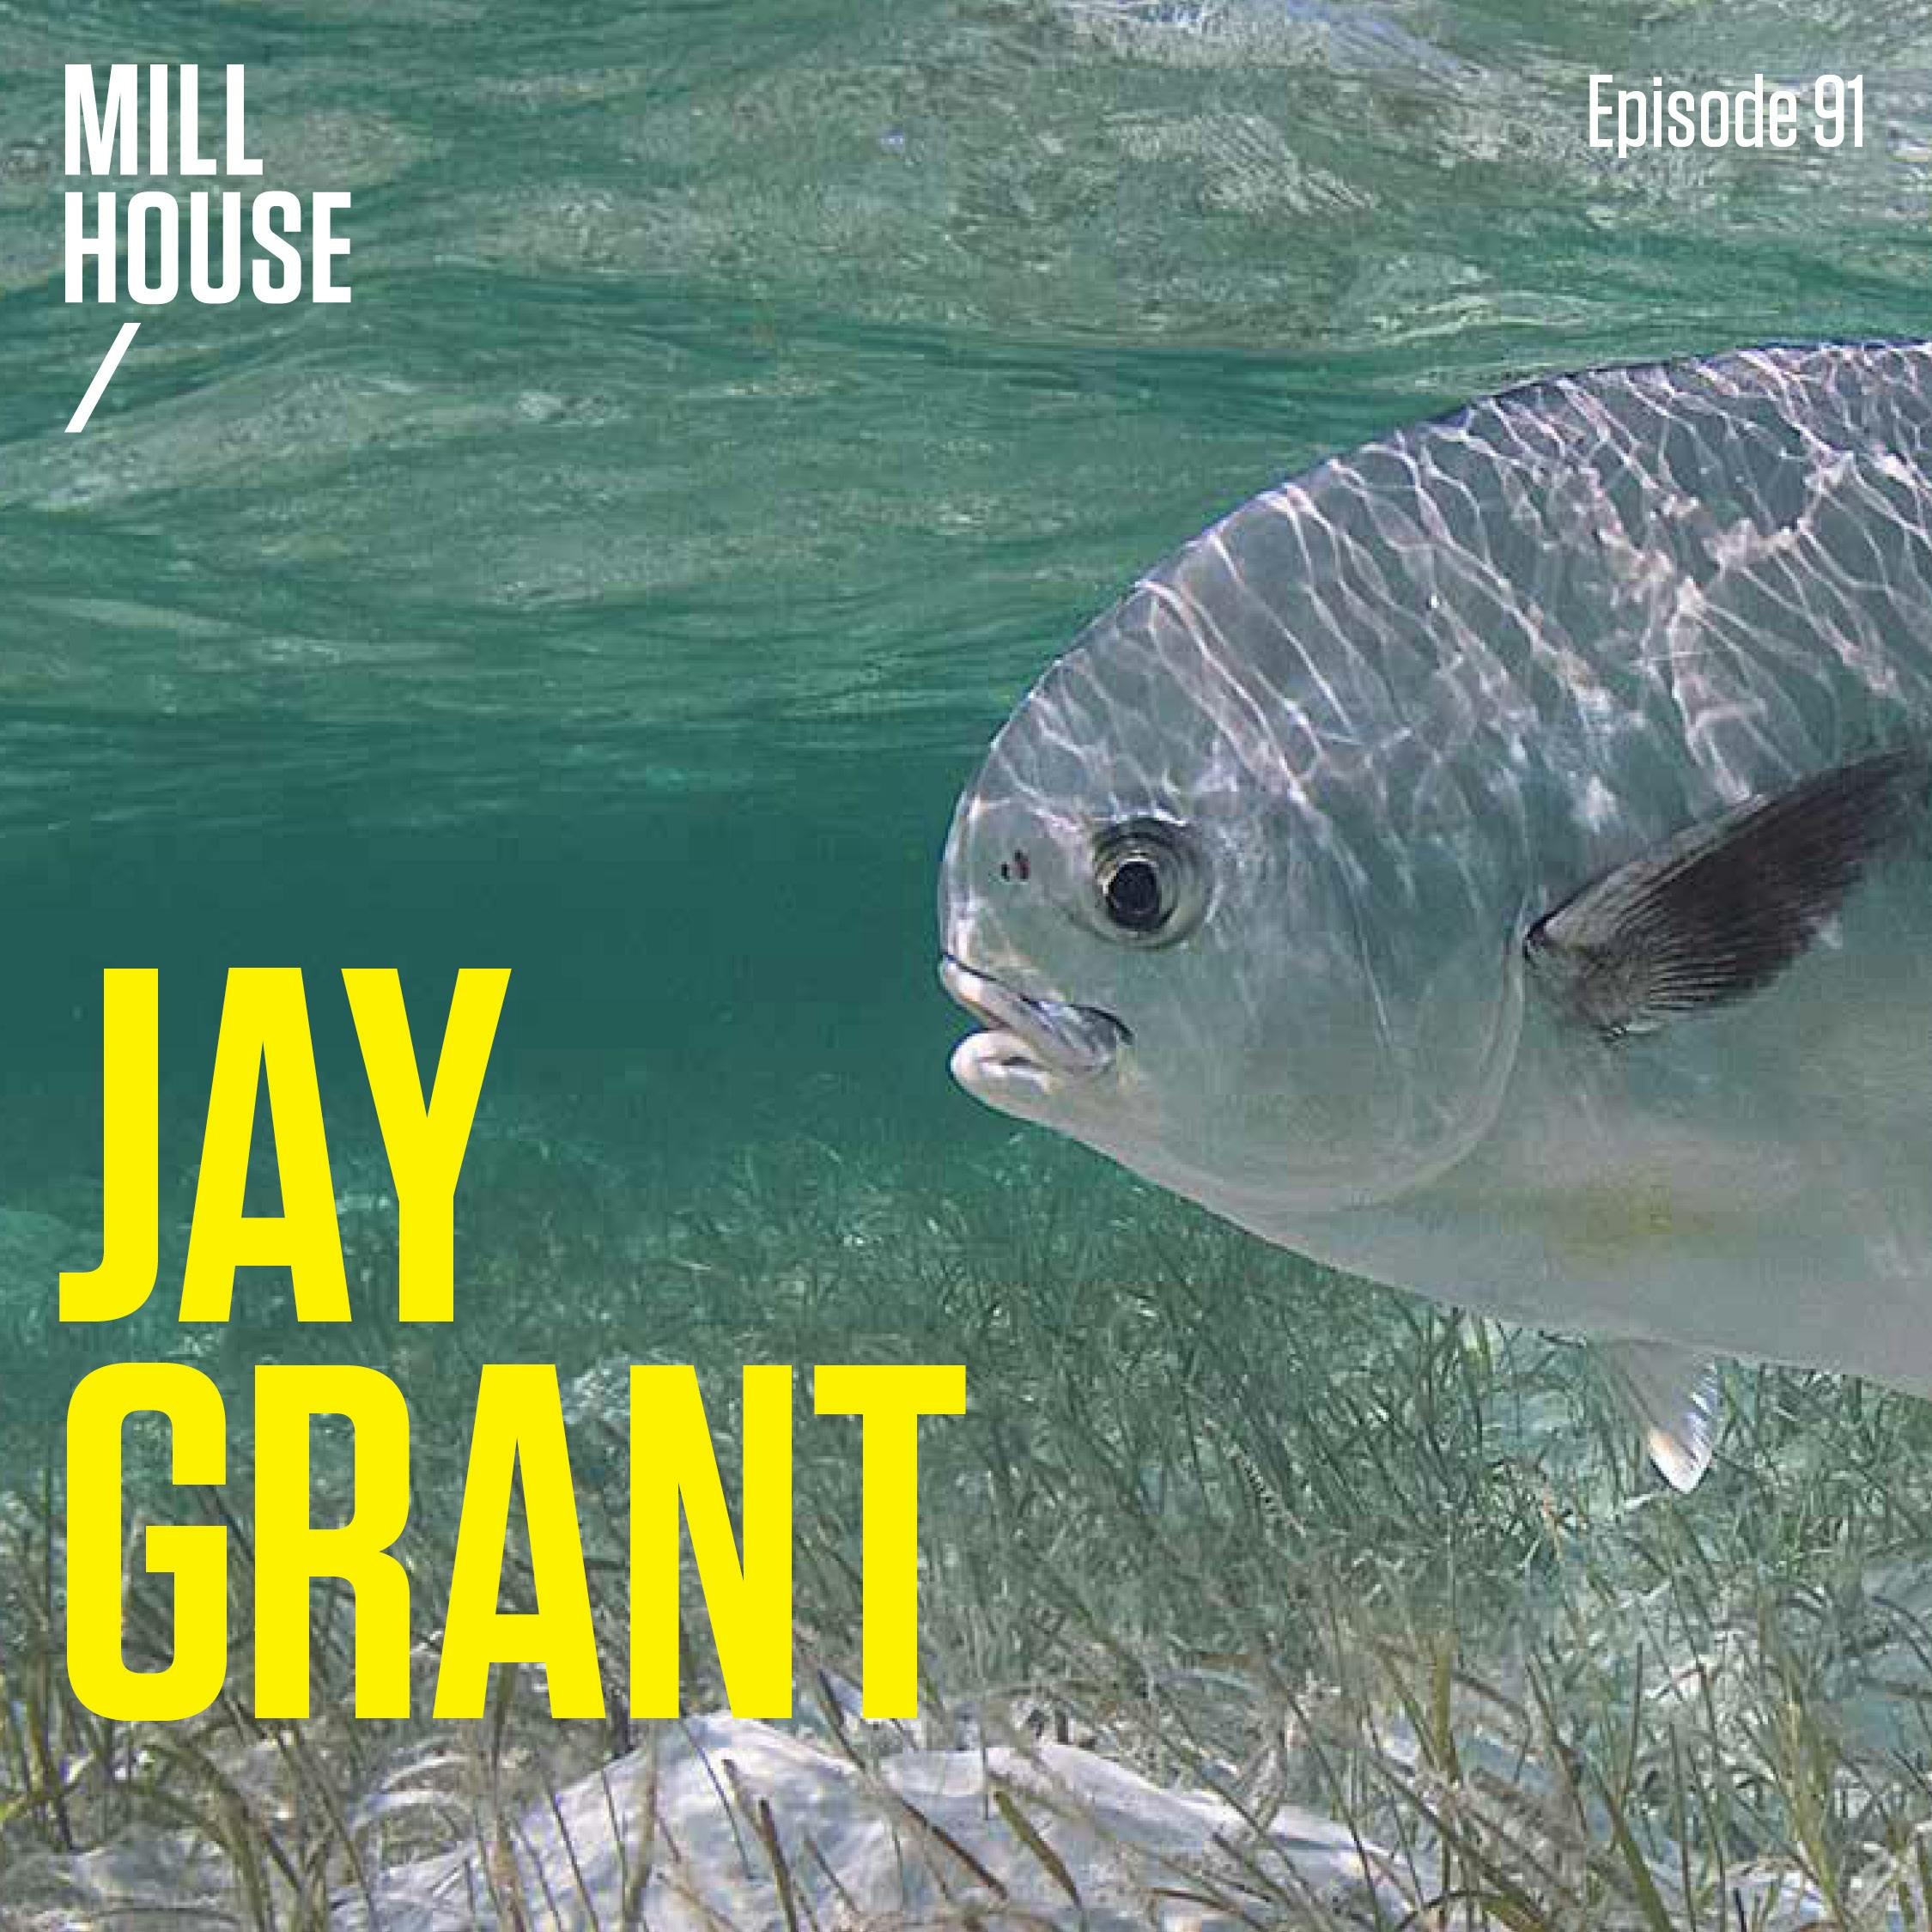 Episode 91: Jay Grant - The Greatest Permit Fisherman You've Never Heard Of